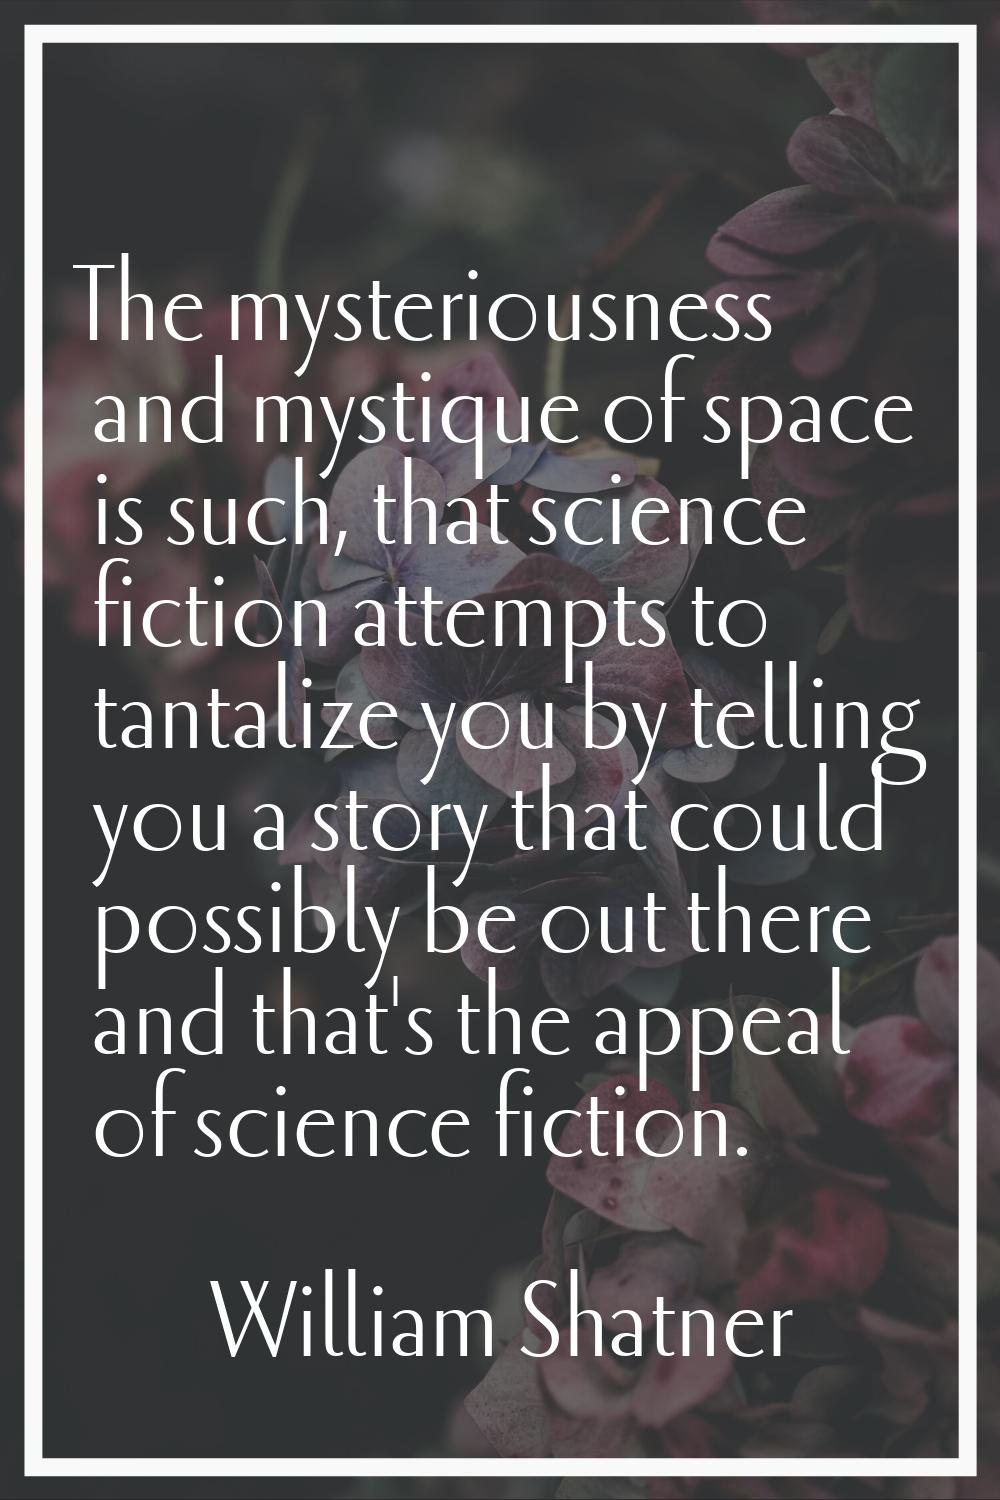 The mysteriousness and mystique of space is such, that science fiction attempts to tantalize you by